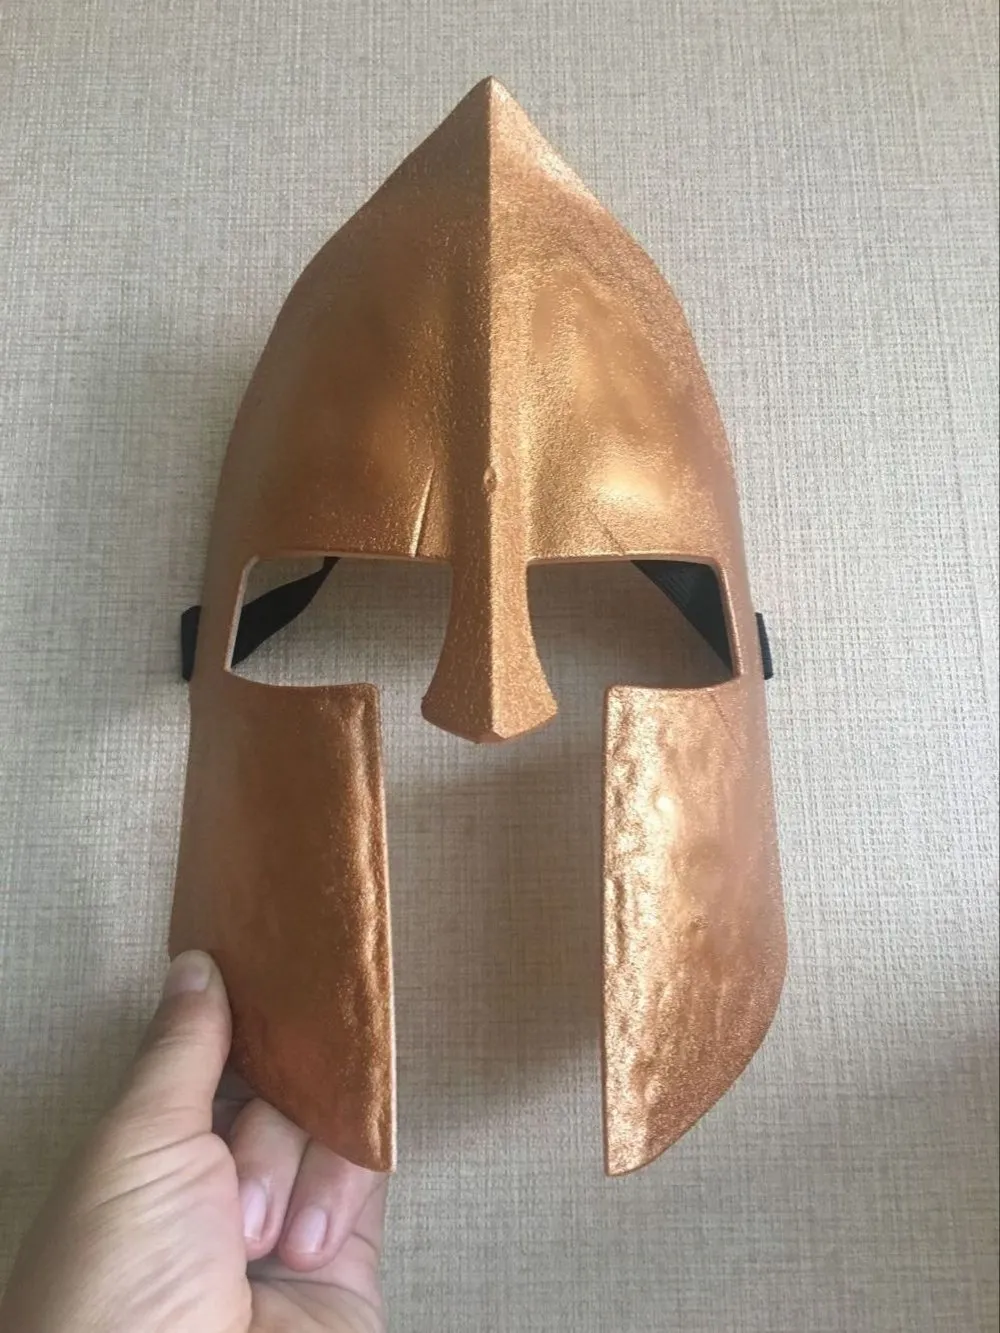 New Delicated Spartans 300 Mask Gold Fight Mask Masquerade Party Halloween Dance Birthday Mask